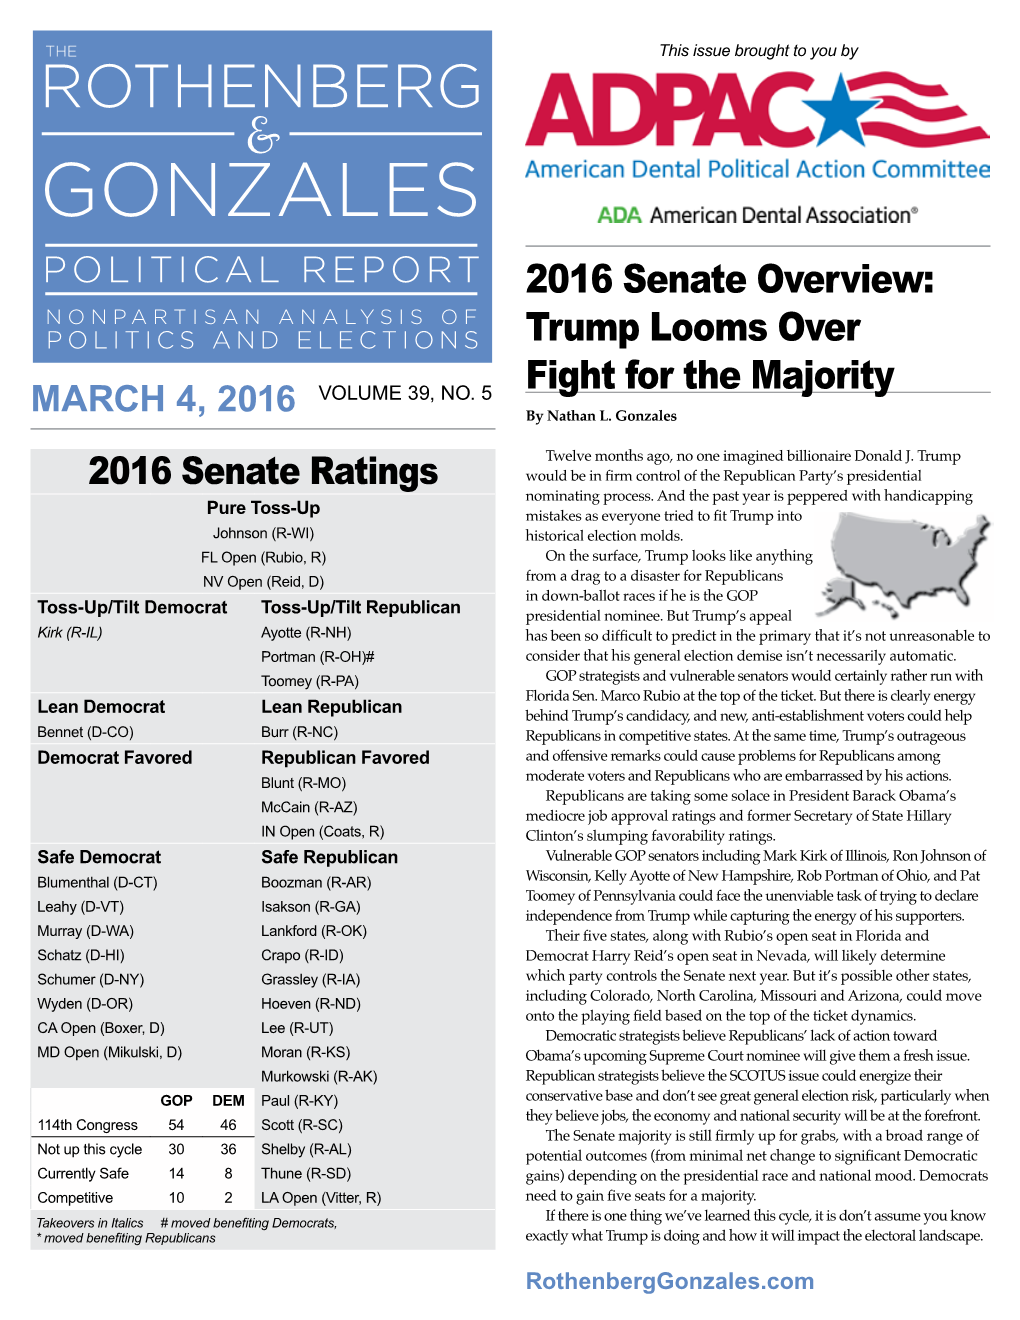 2016 Senate Overview: Trump Looms Over Fight for the Majority